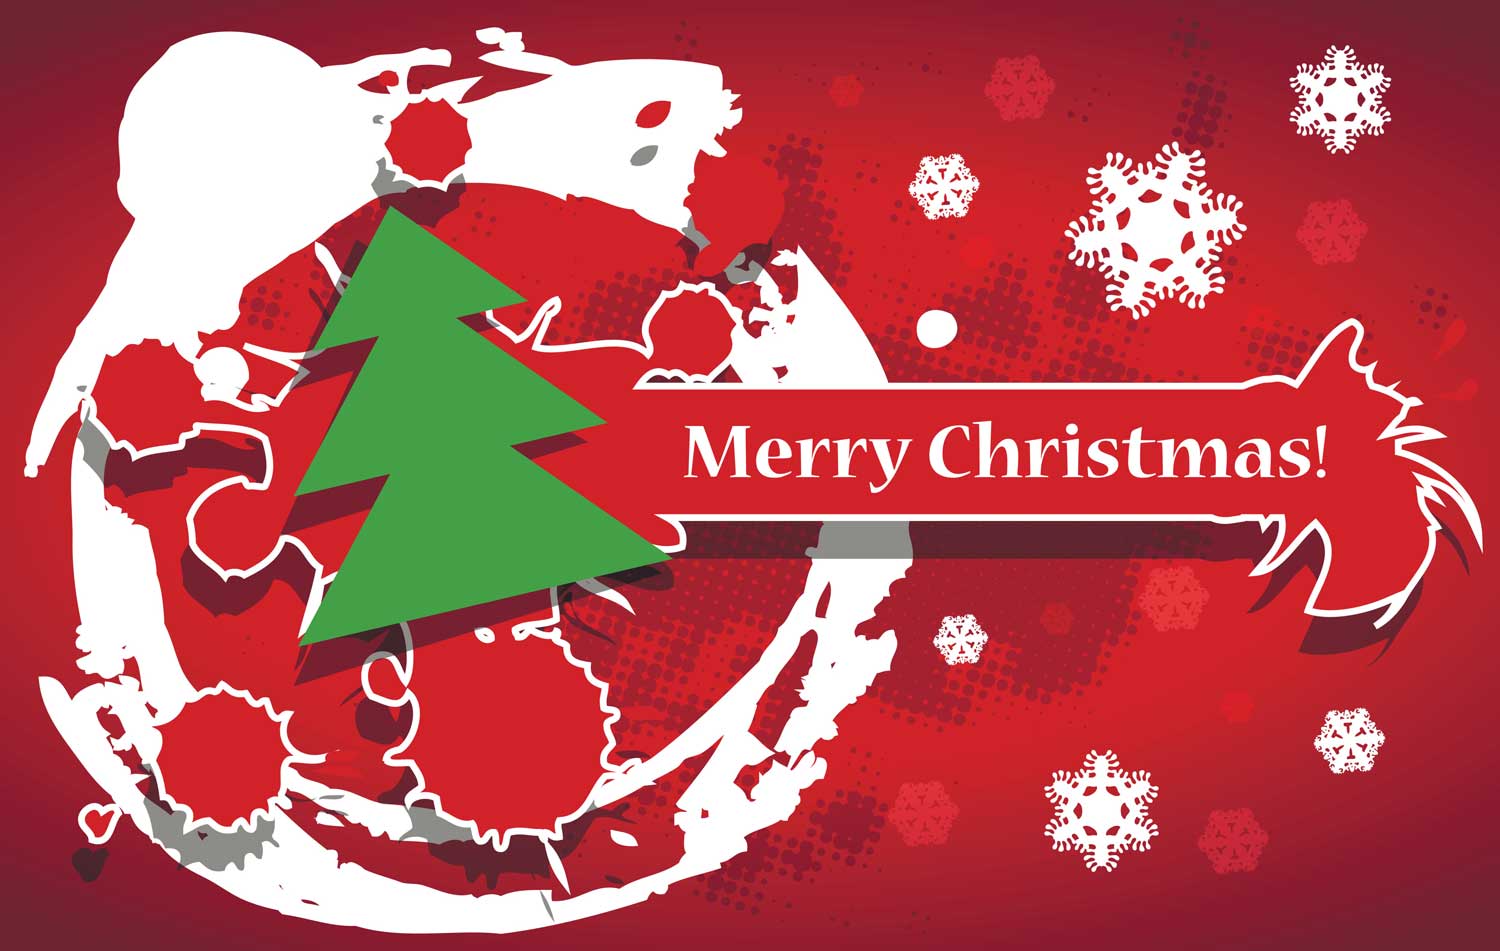 Merry Christmas 2020 Wallpaper and Happy New Year 2021 Image